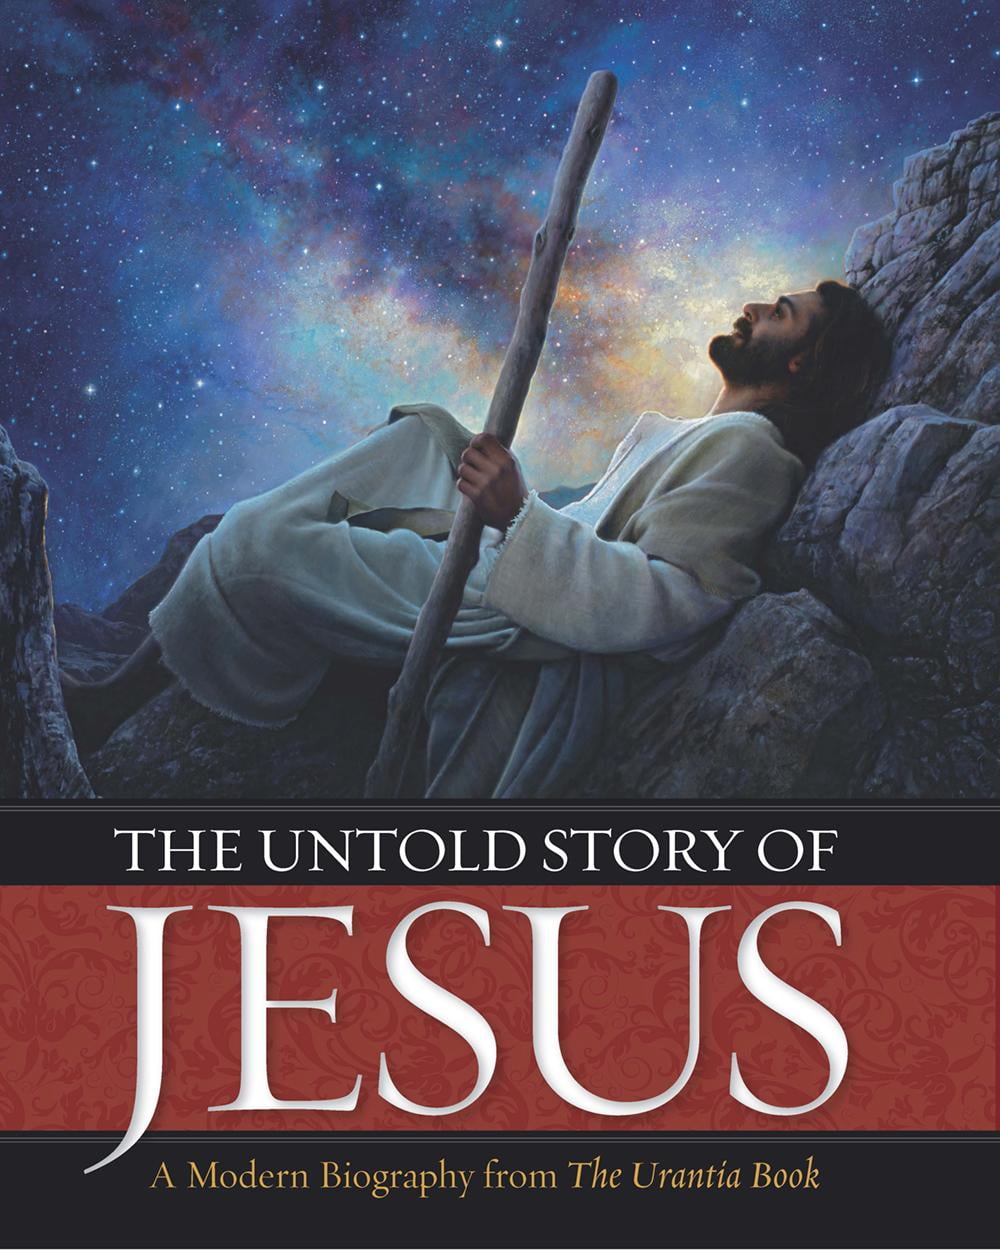 a biography about jesus